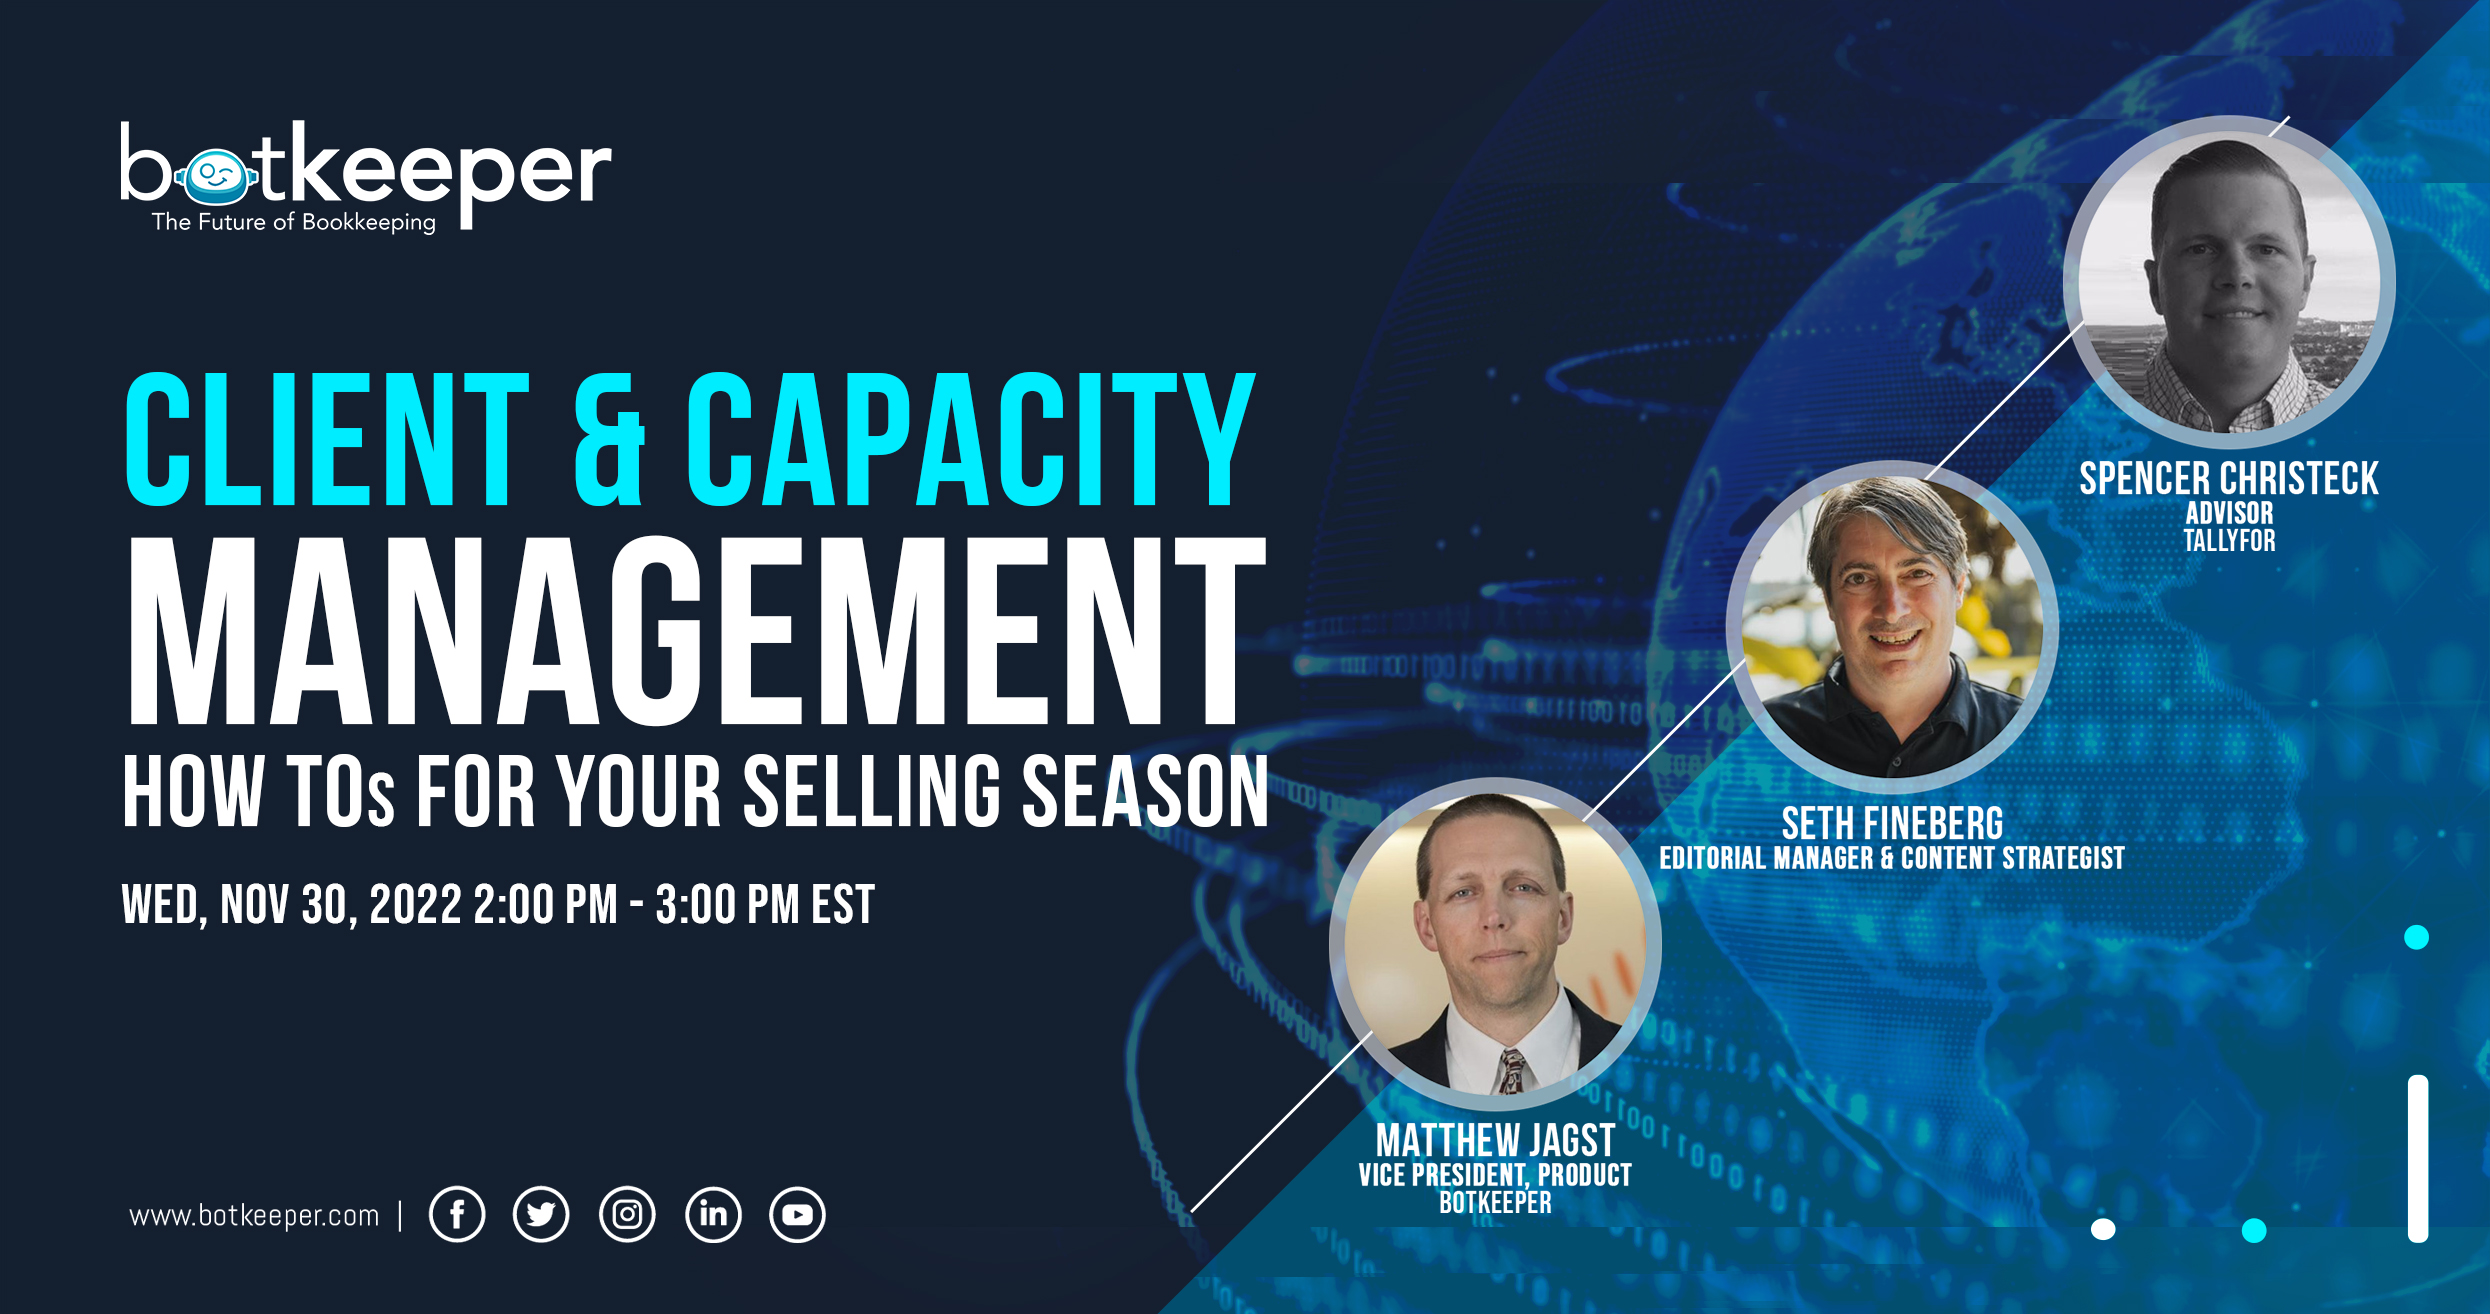 Client-&-Capacity-Management-How-Tos-for-your-Selling-Season-social-image_PROOF2